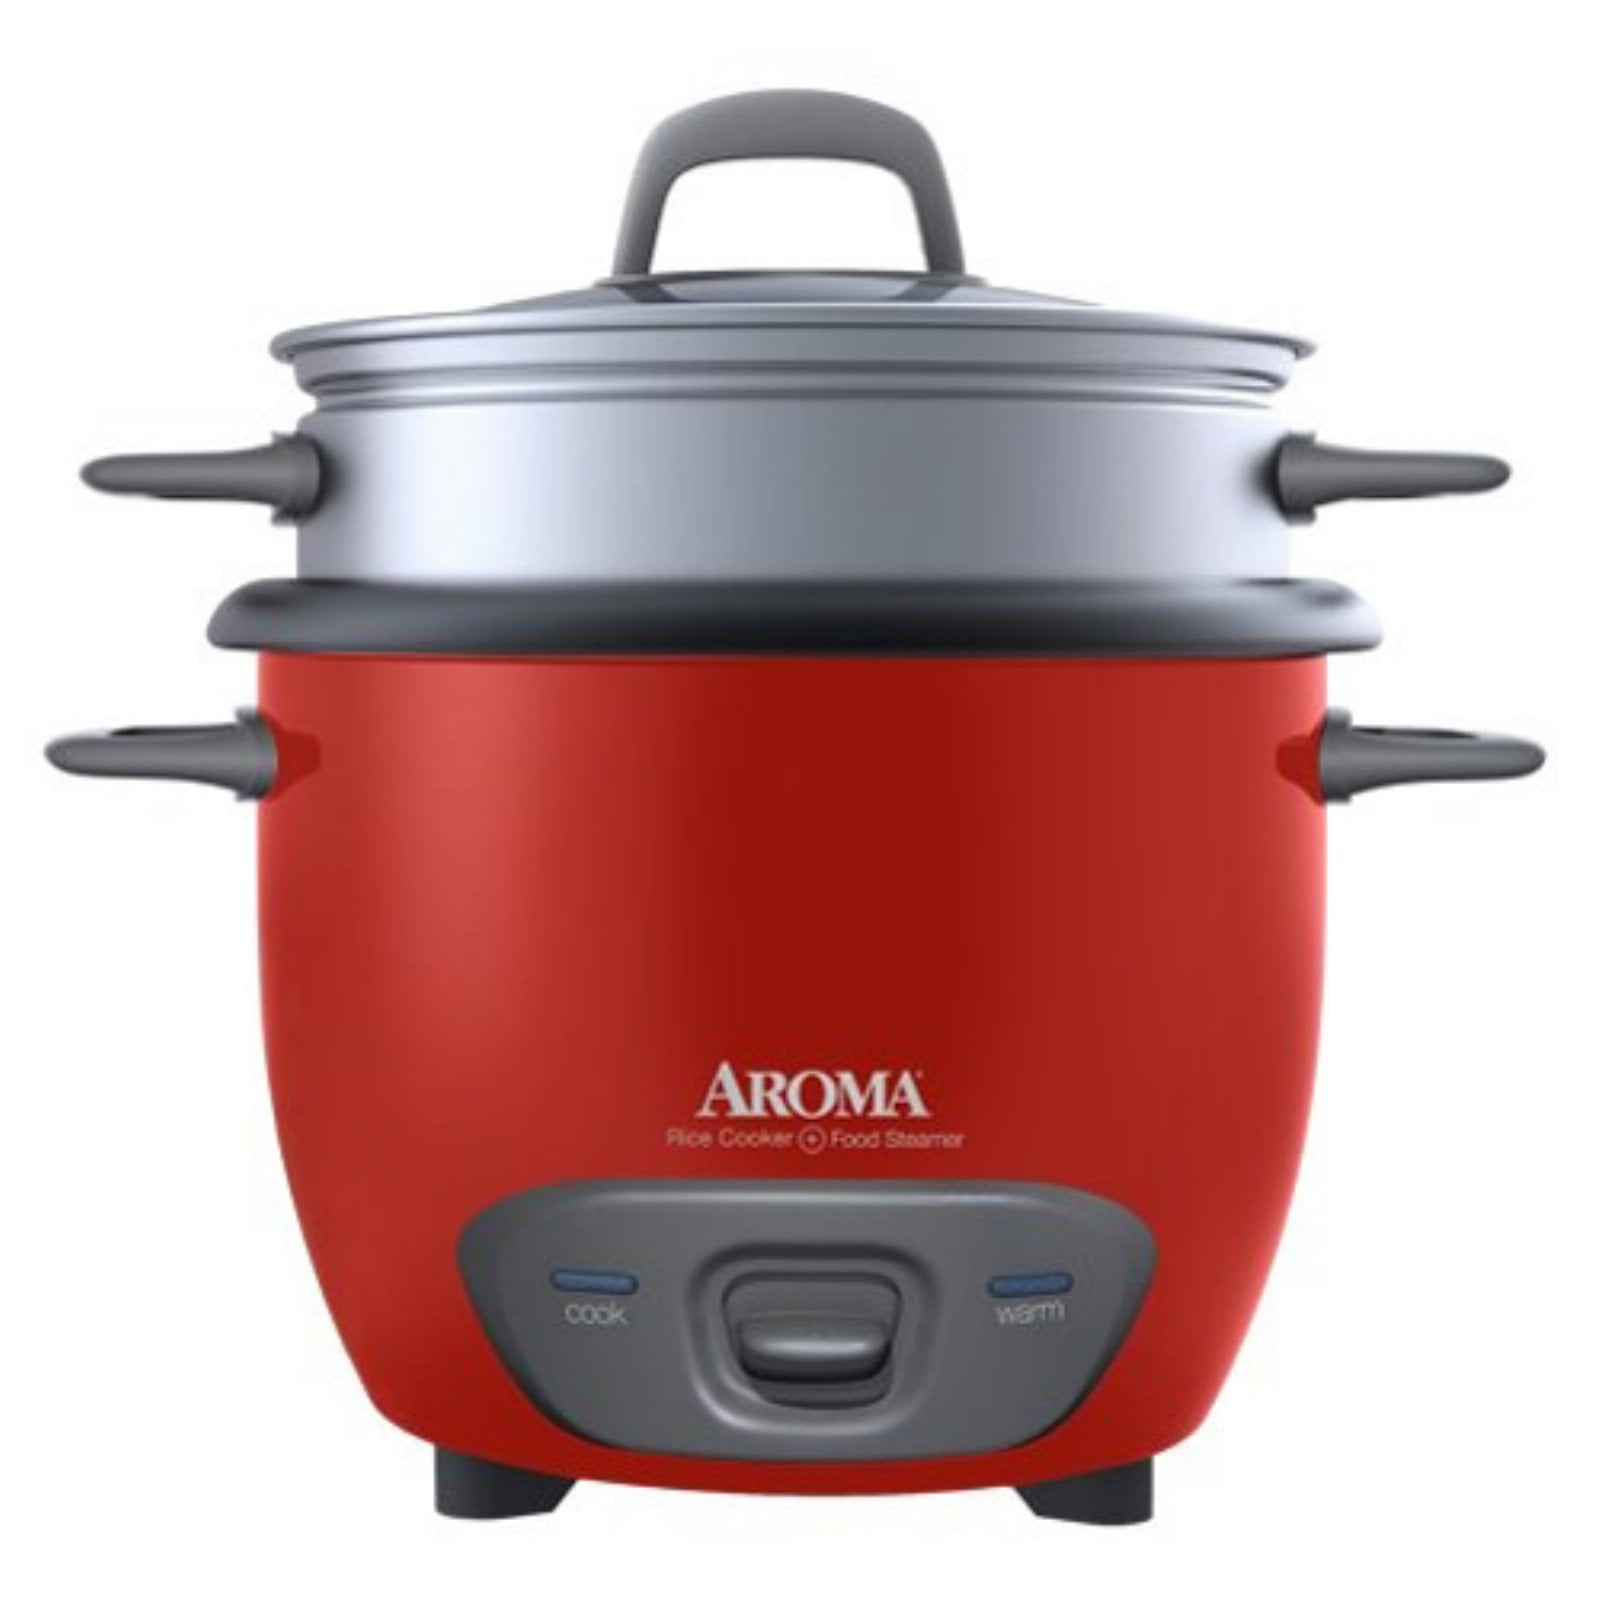 Aroma Rice Cooker and Food Steamer Review 